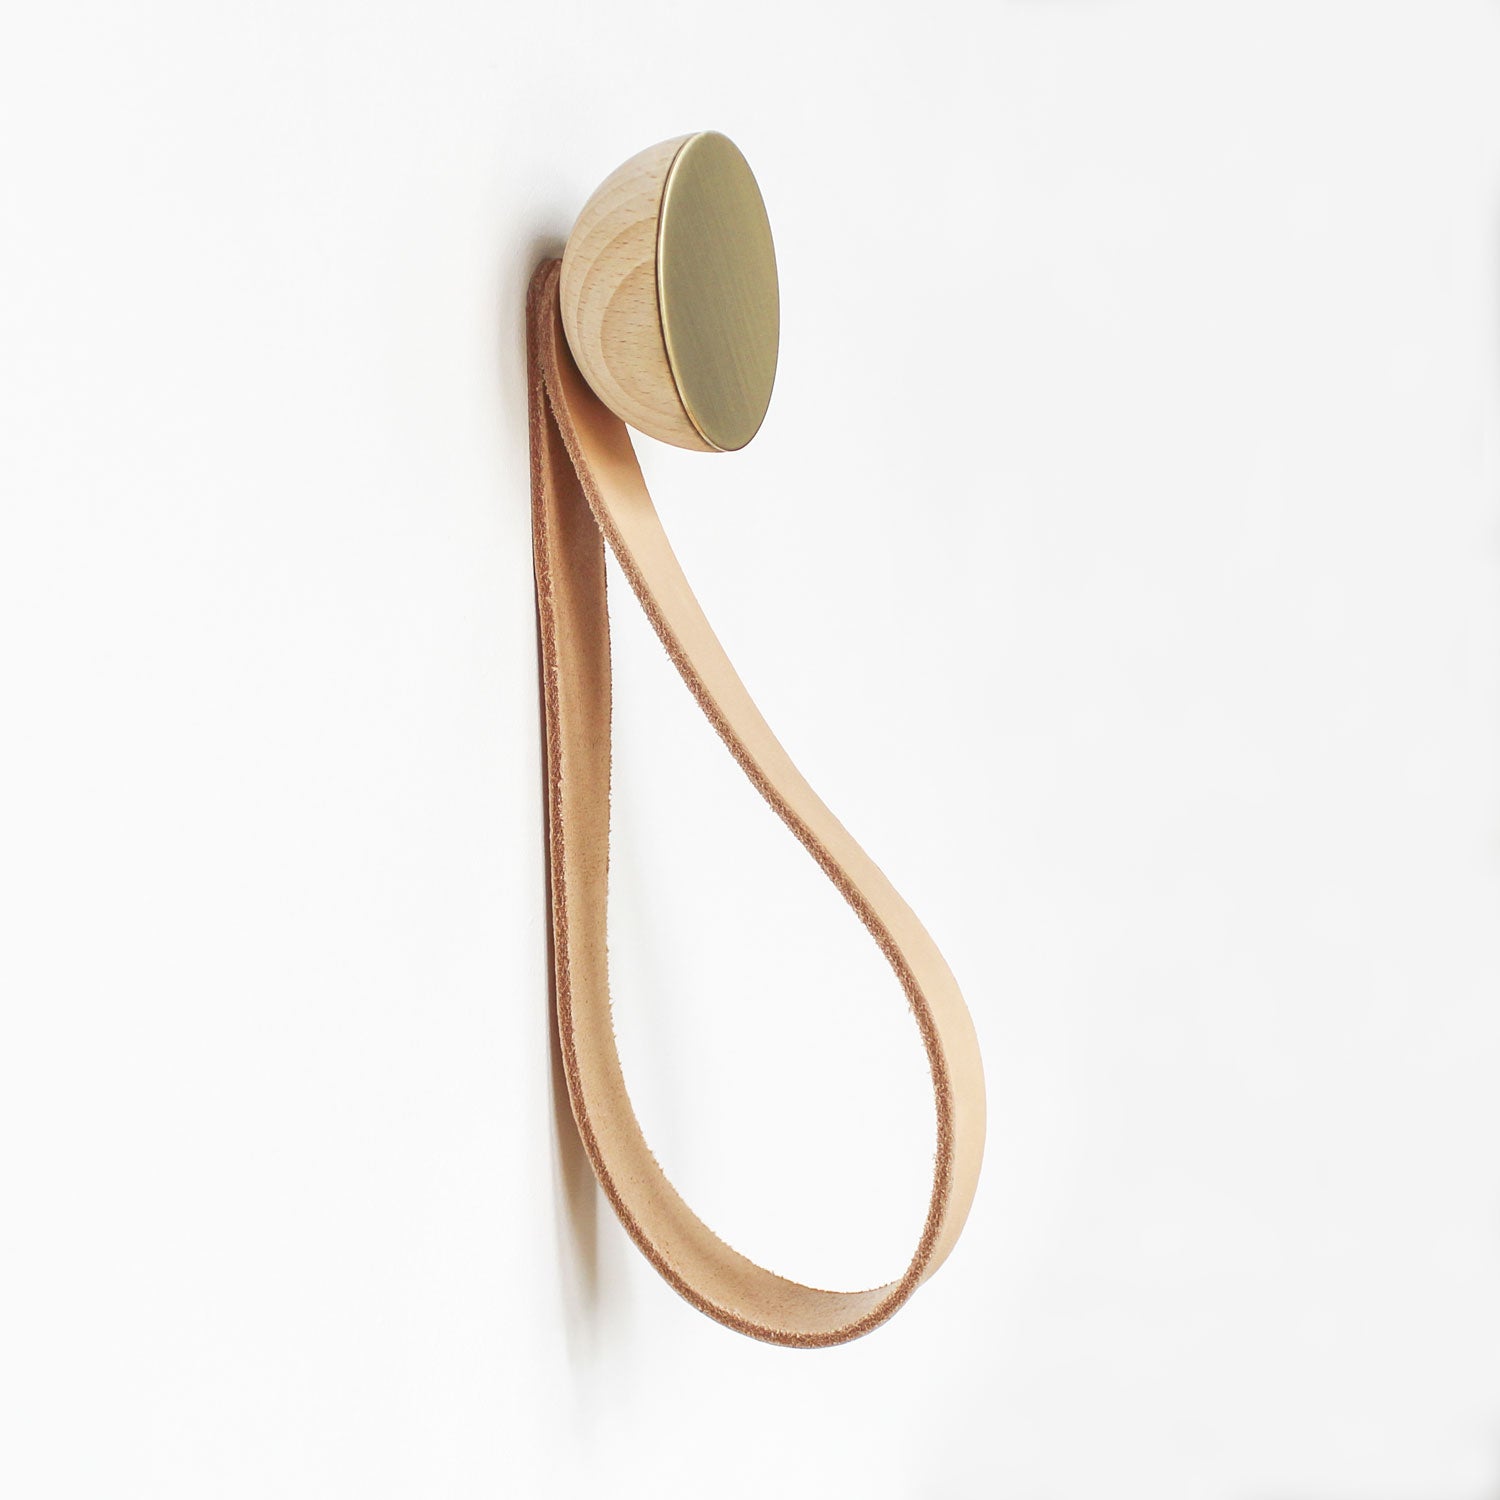 Round Beech Wood & Brass Wall Mounted Coat Hook / Hanger with